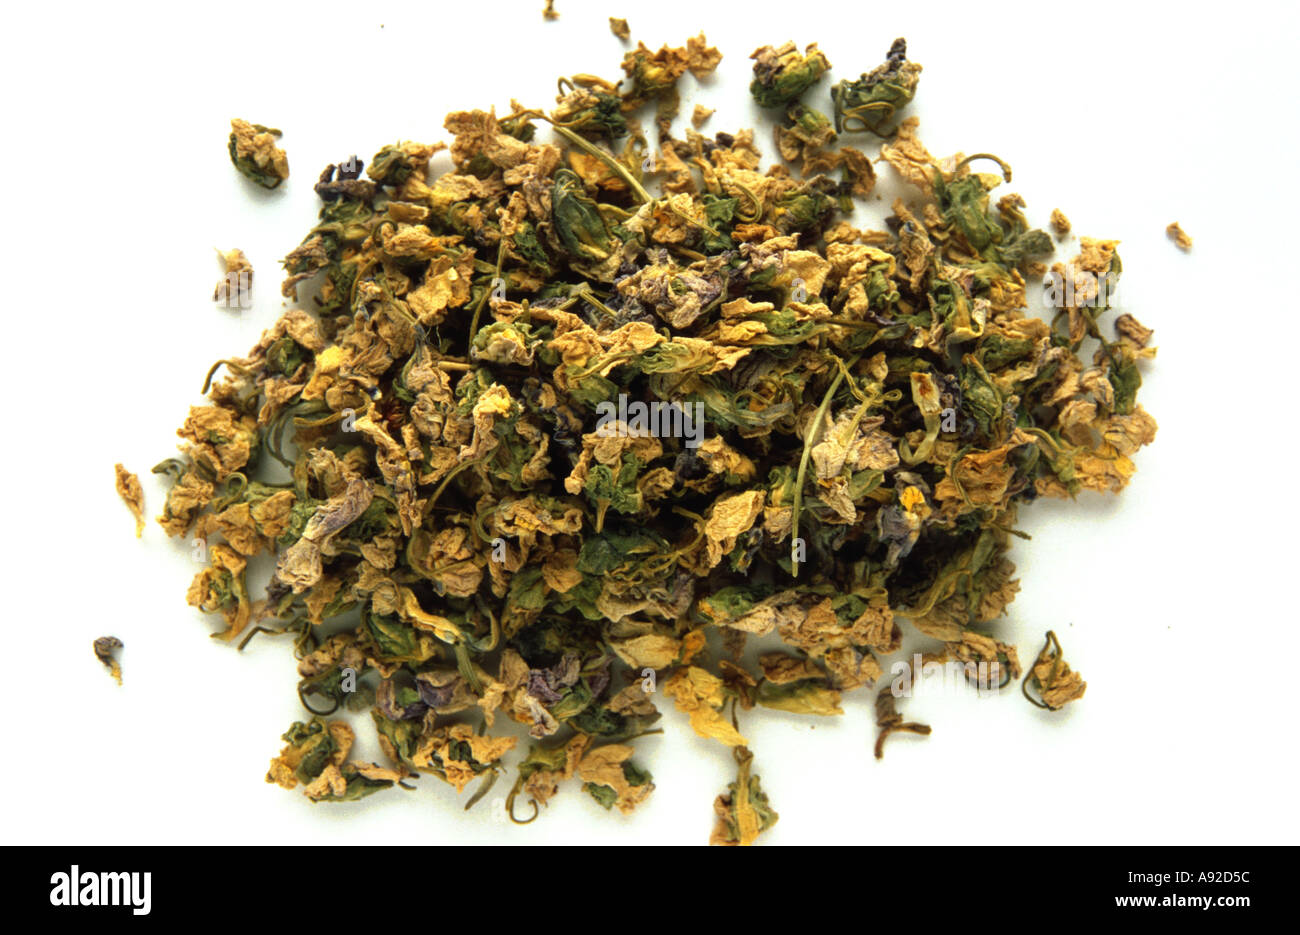 Medicinal plant dried blossoms and leaves of Sweet Violet Viola odorata Veilchen Stock Photo